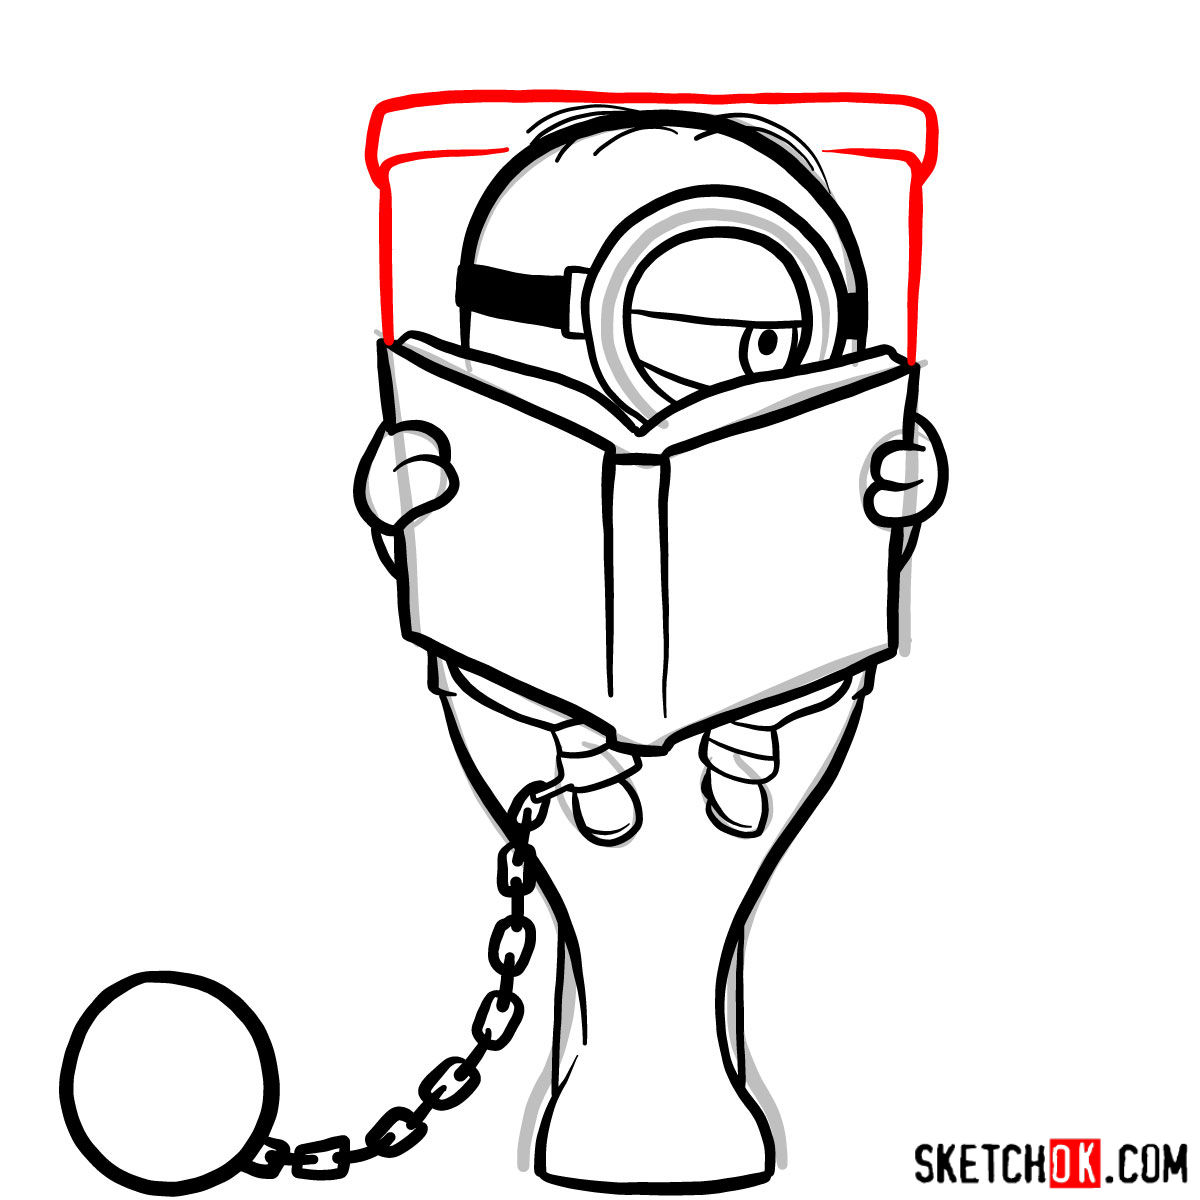 How to draw minion in the toilet reading a book - step 09